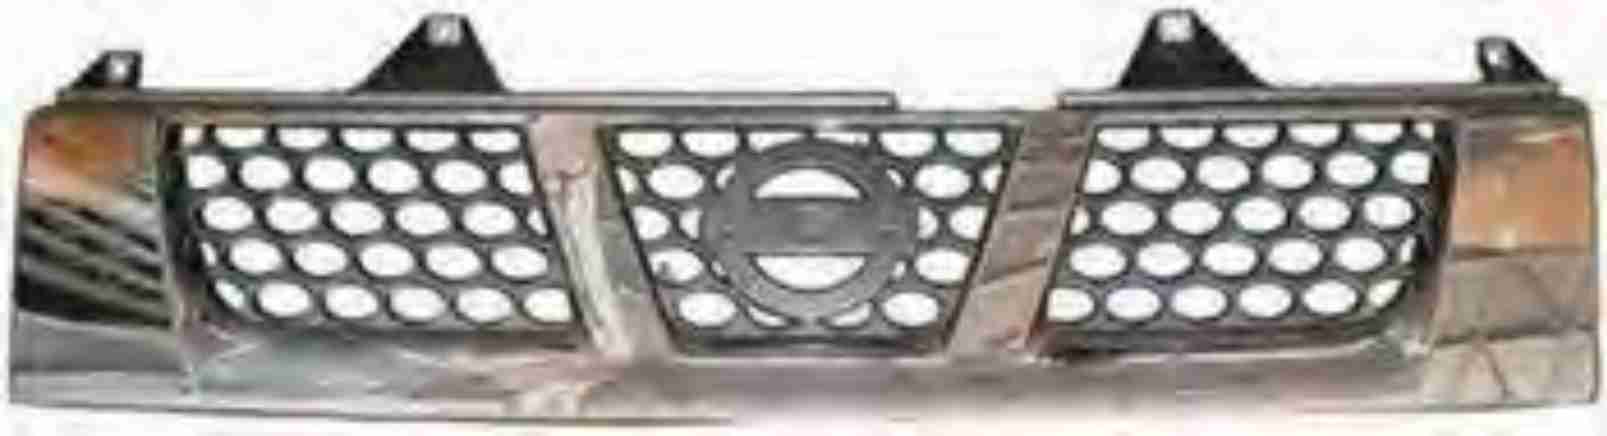 GRI502127 - FRONTIER 01 GRILLE ............2005748